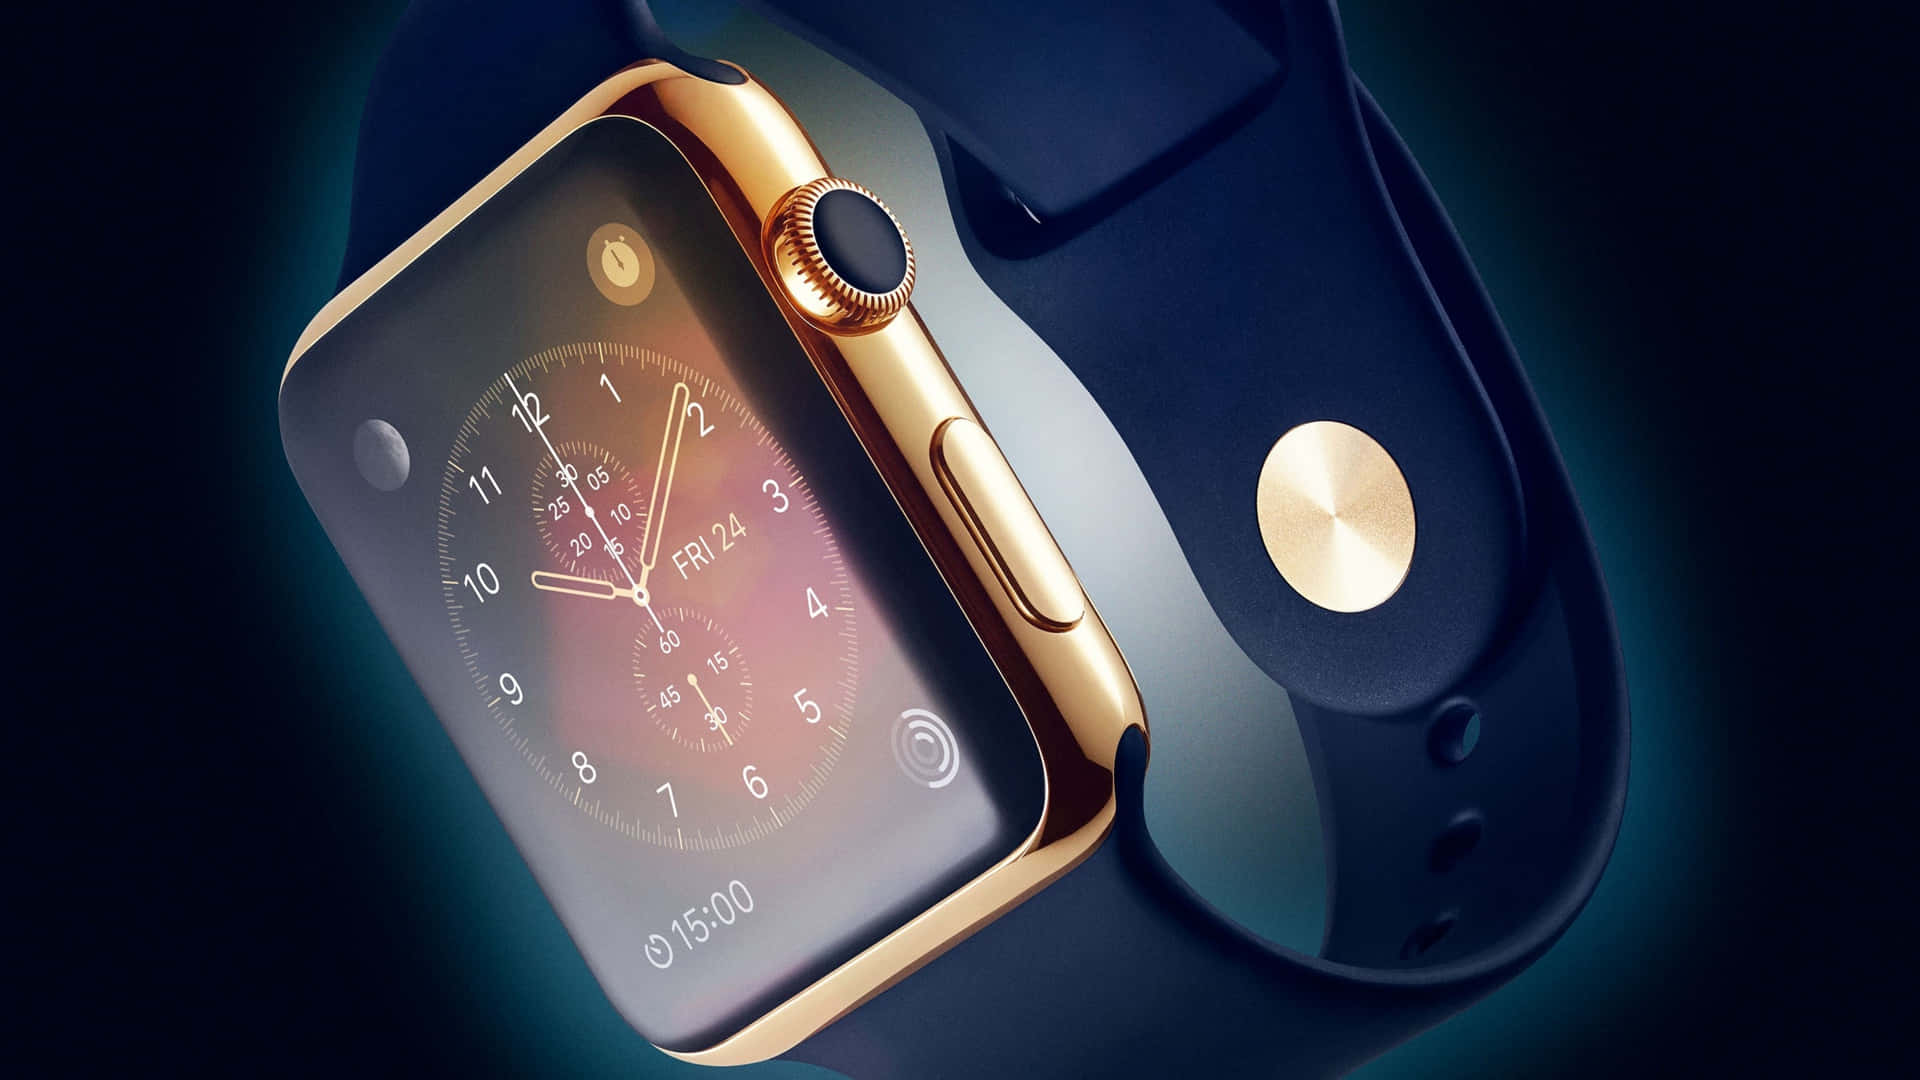 Apple Watch - The Essential Gadget for Everyday Use